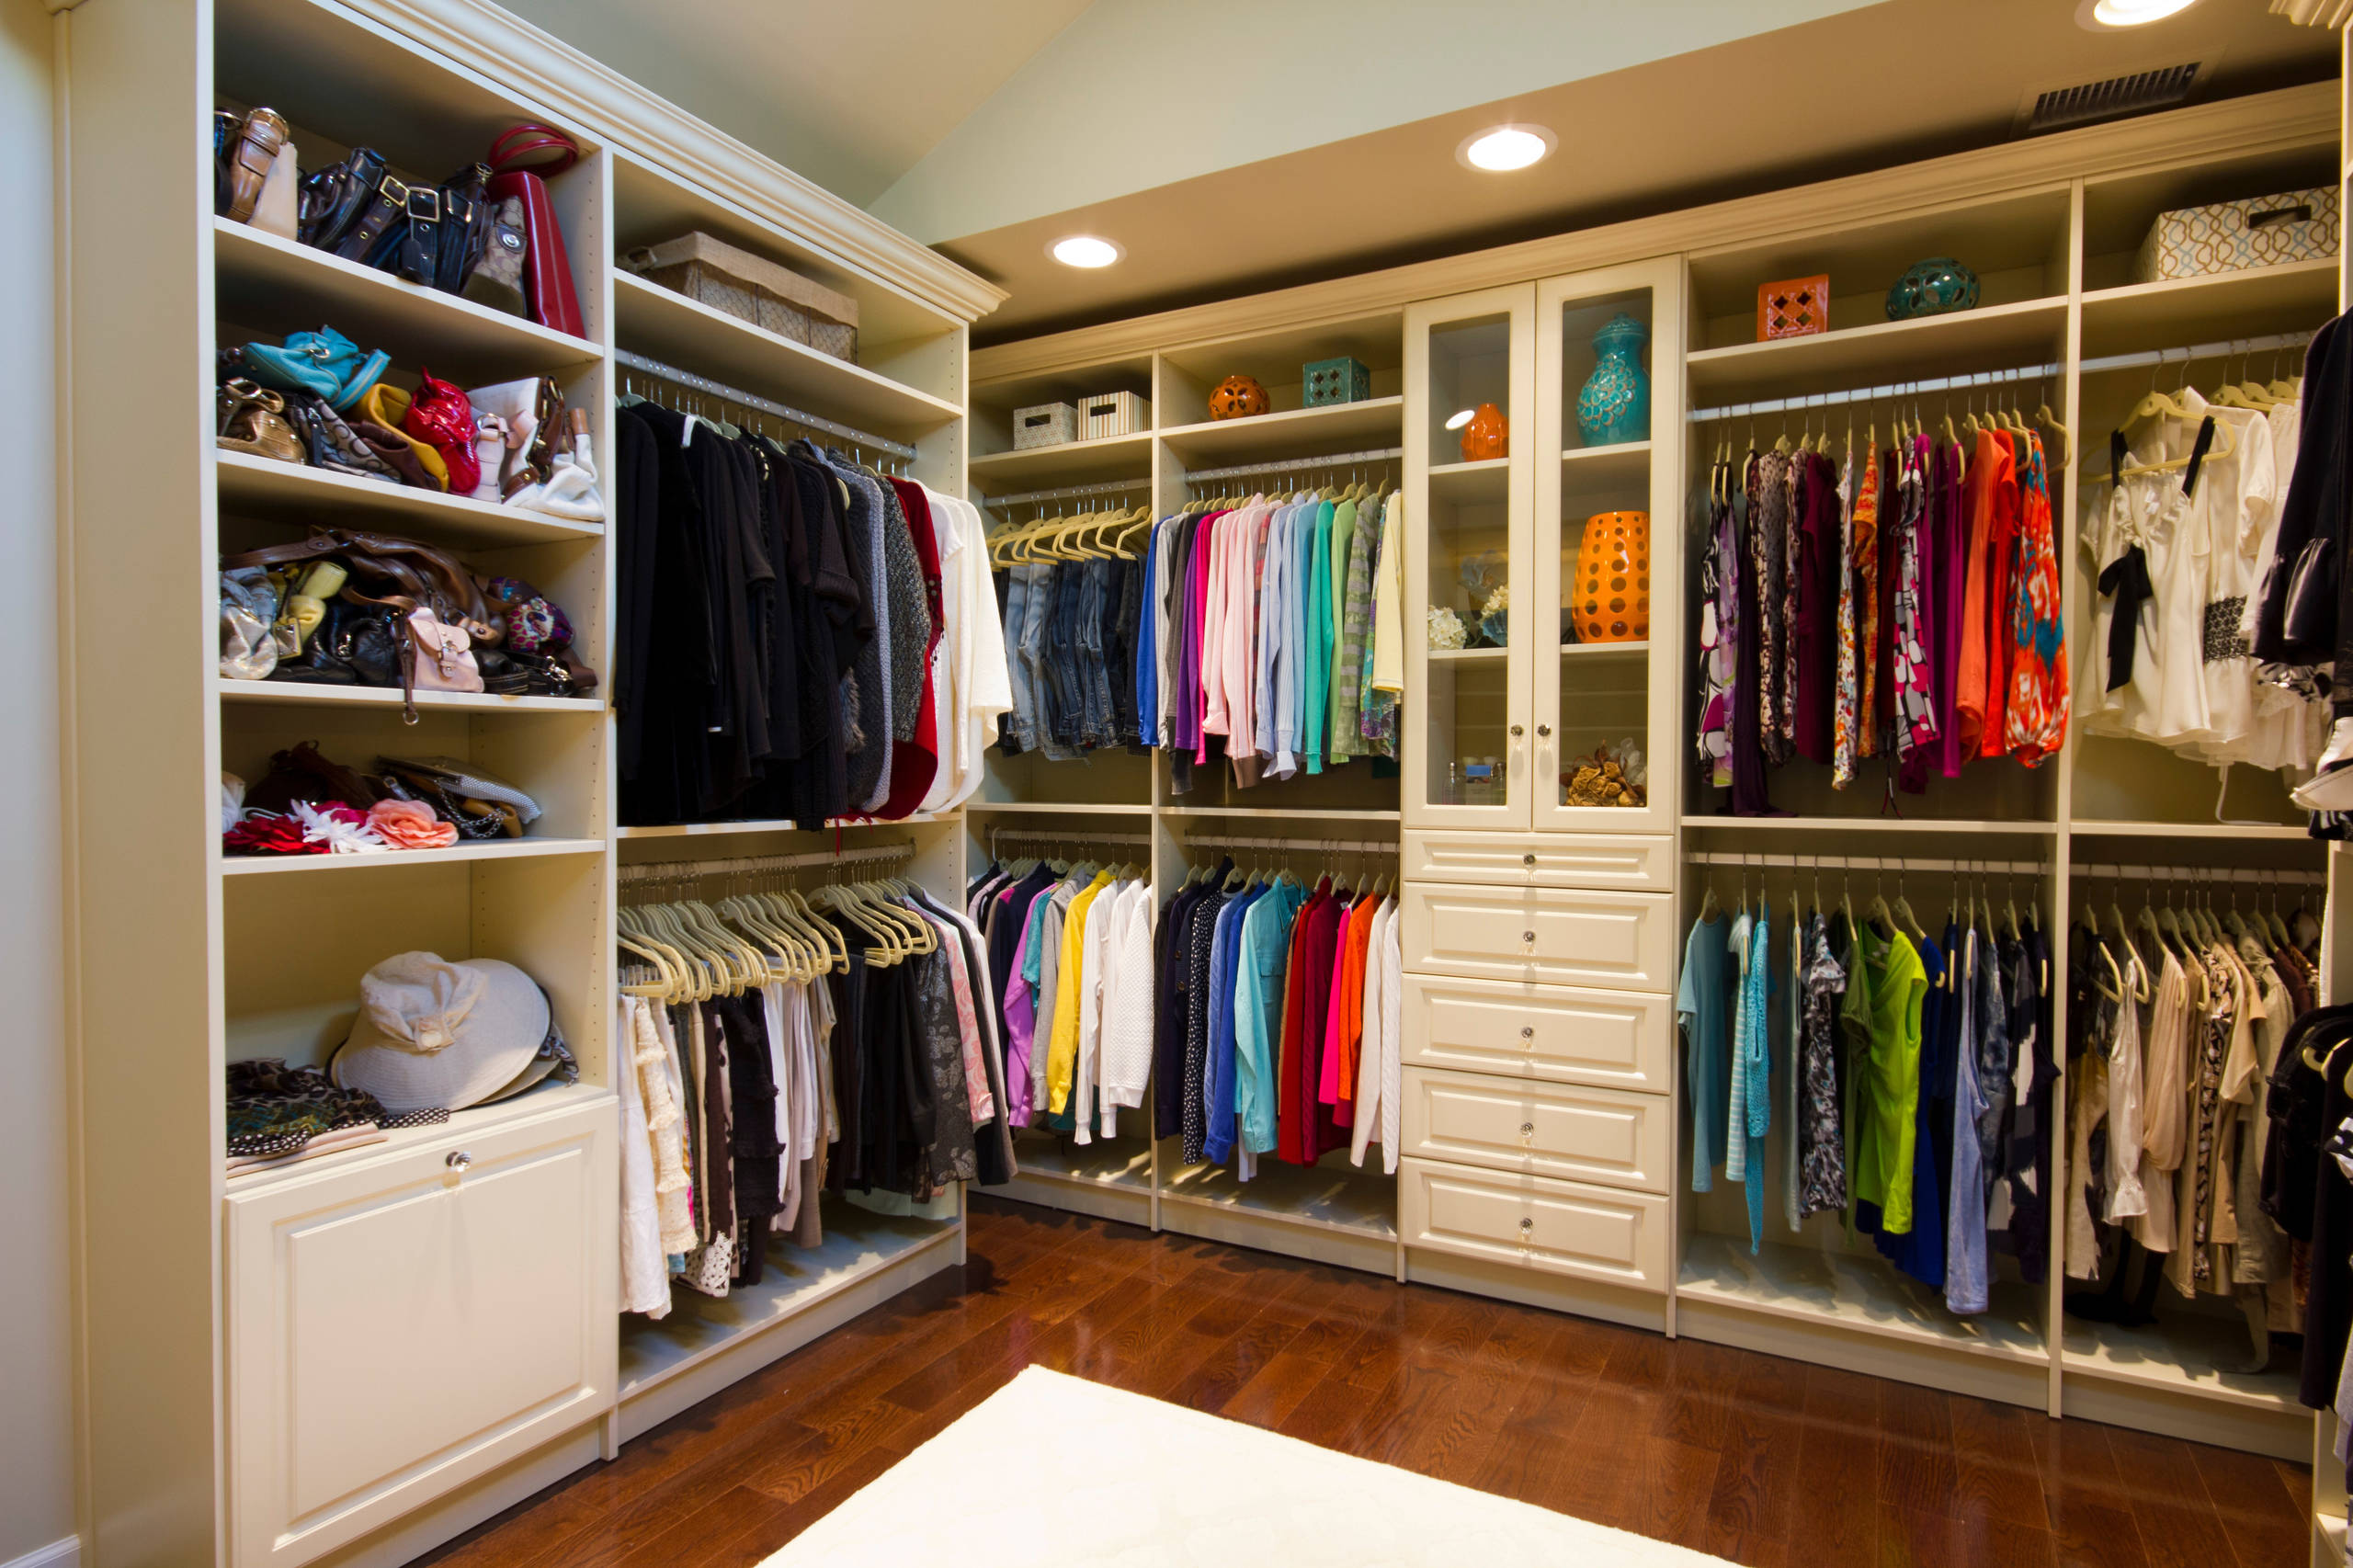 Amazing closet that feels like a high end boutique